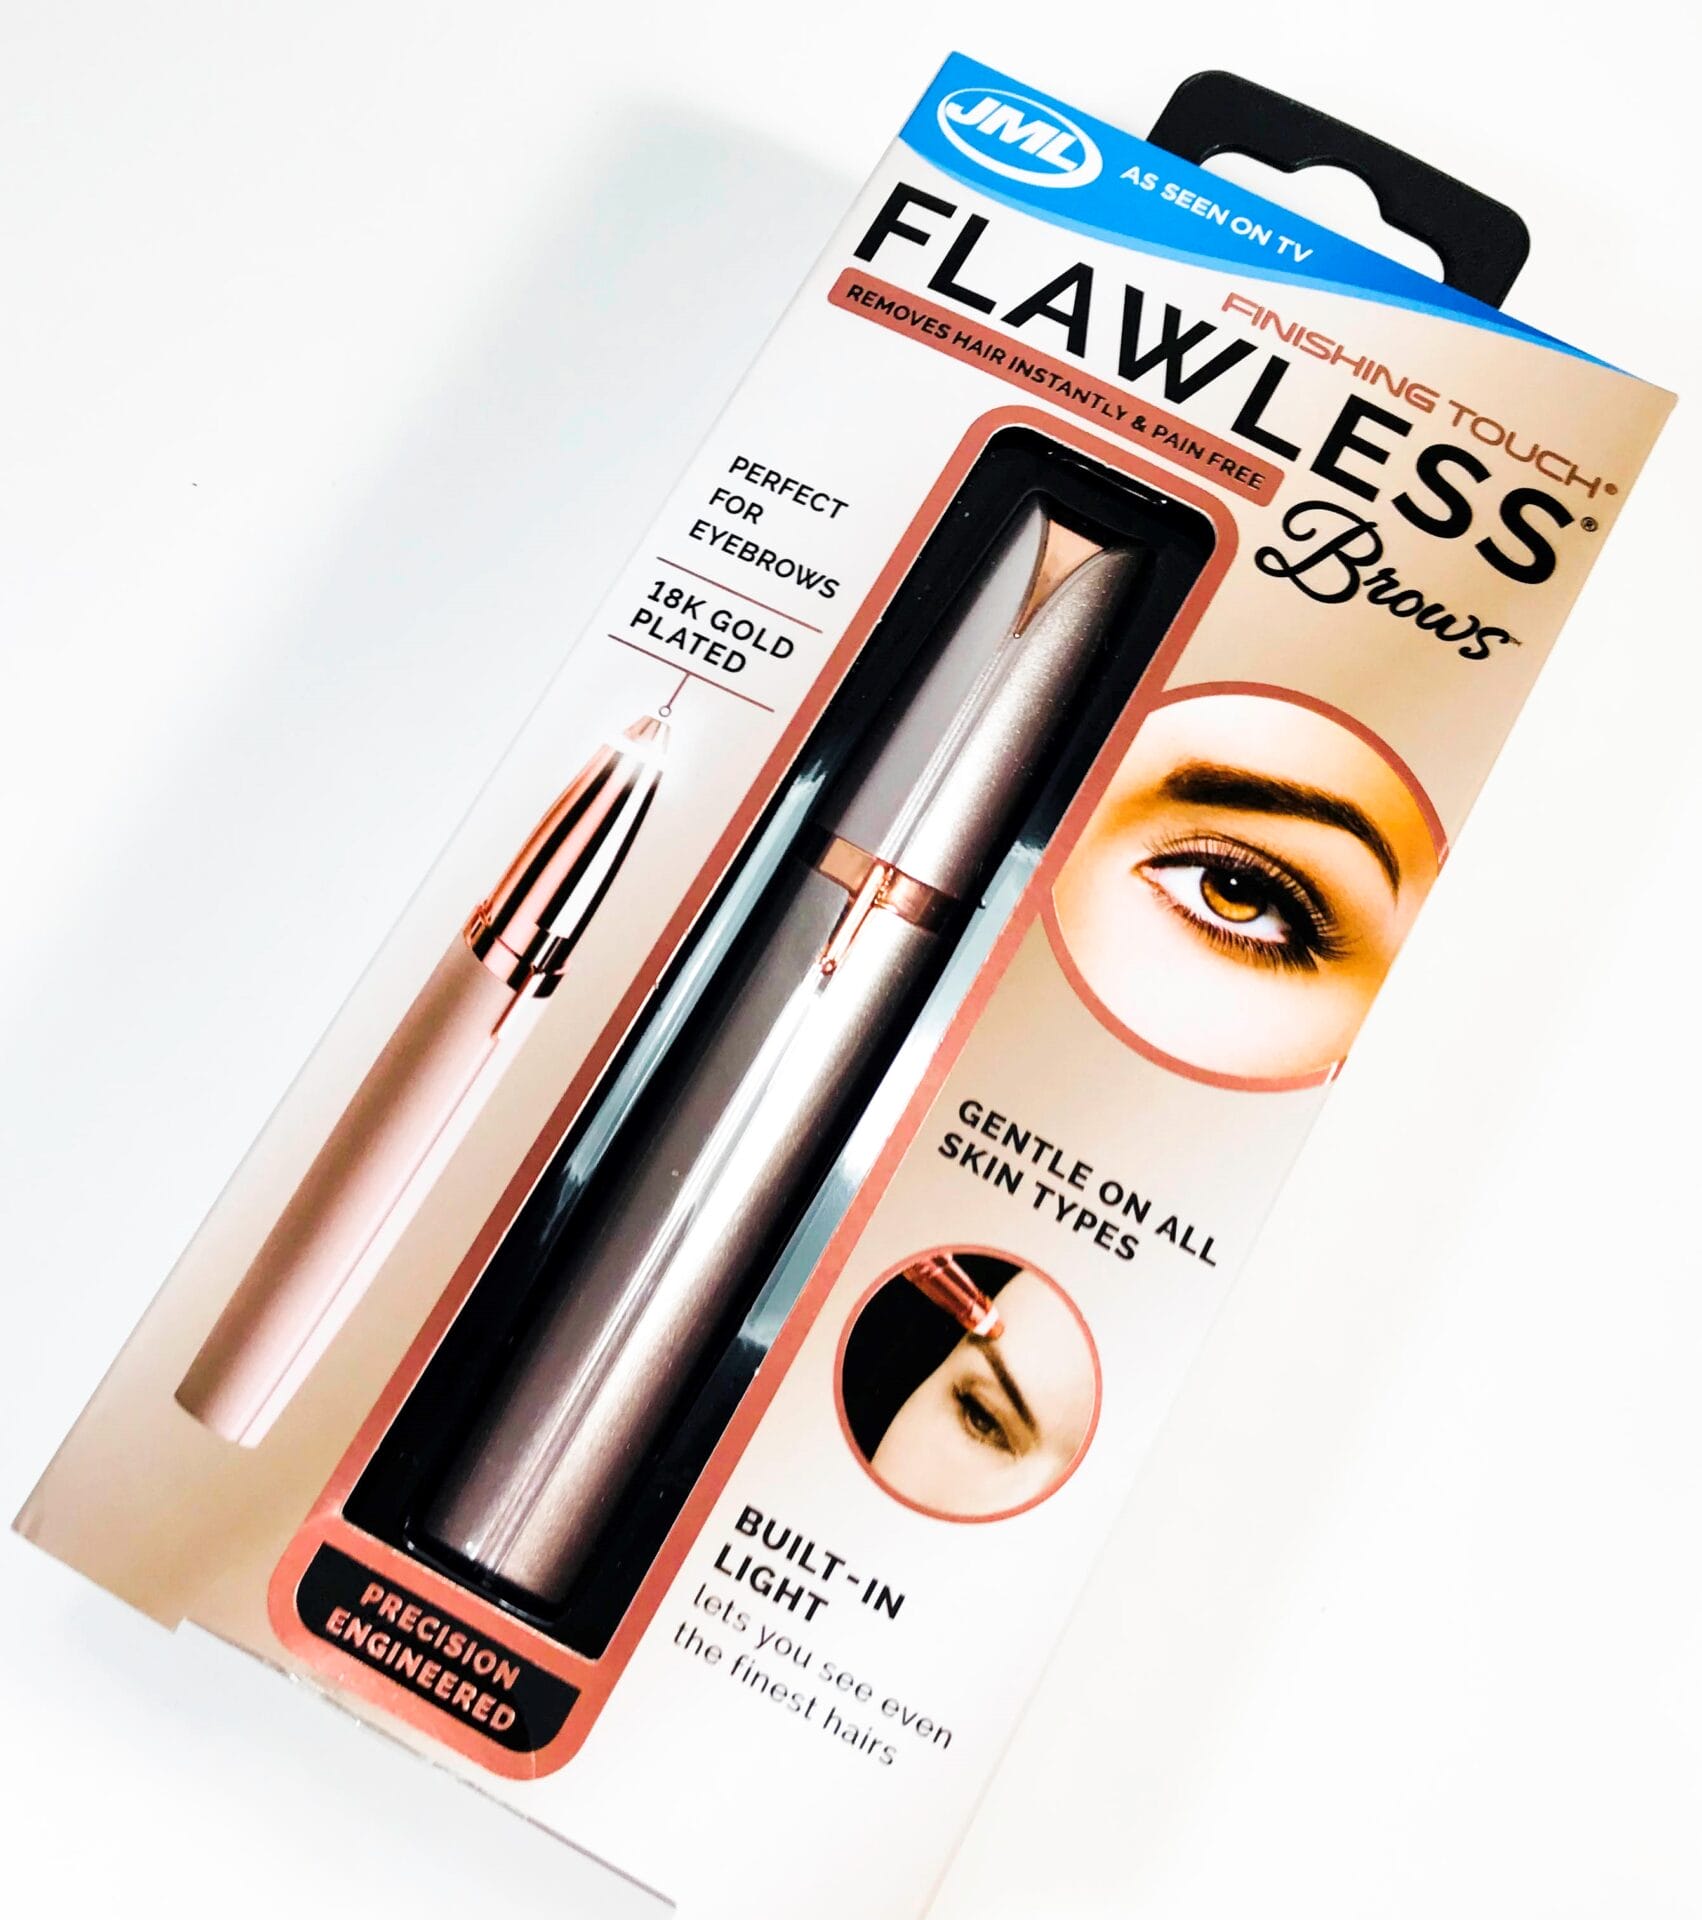 flawless brows 18k gold plated